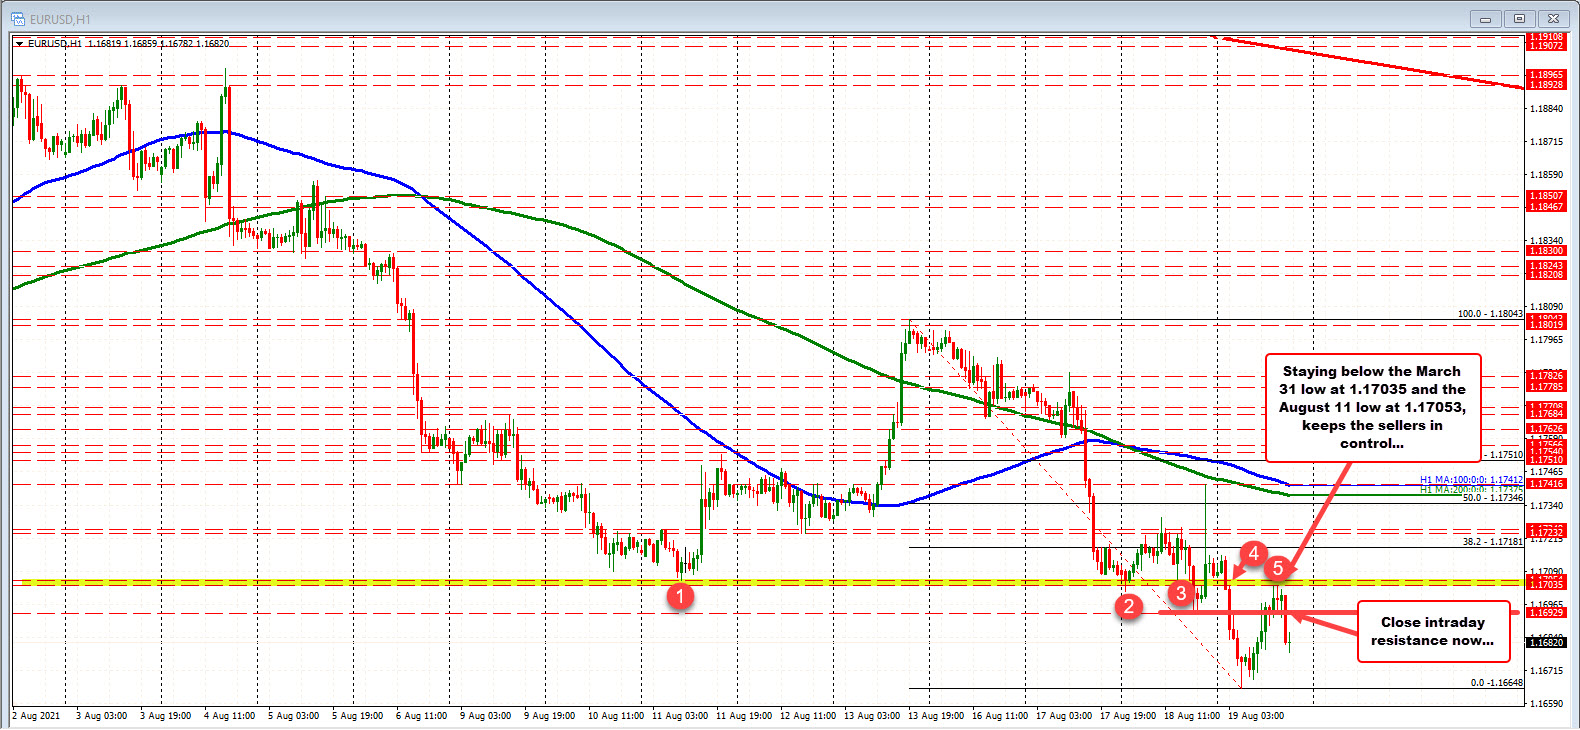 The pair corrective high stalled ahead of the lows between 1.17035 and 1.17053